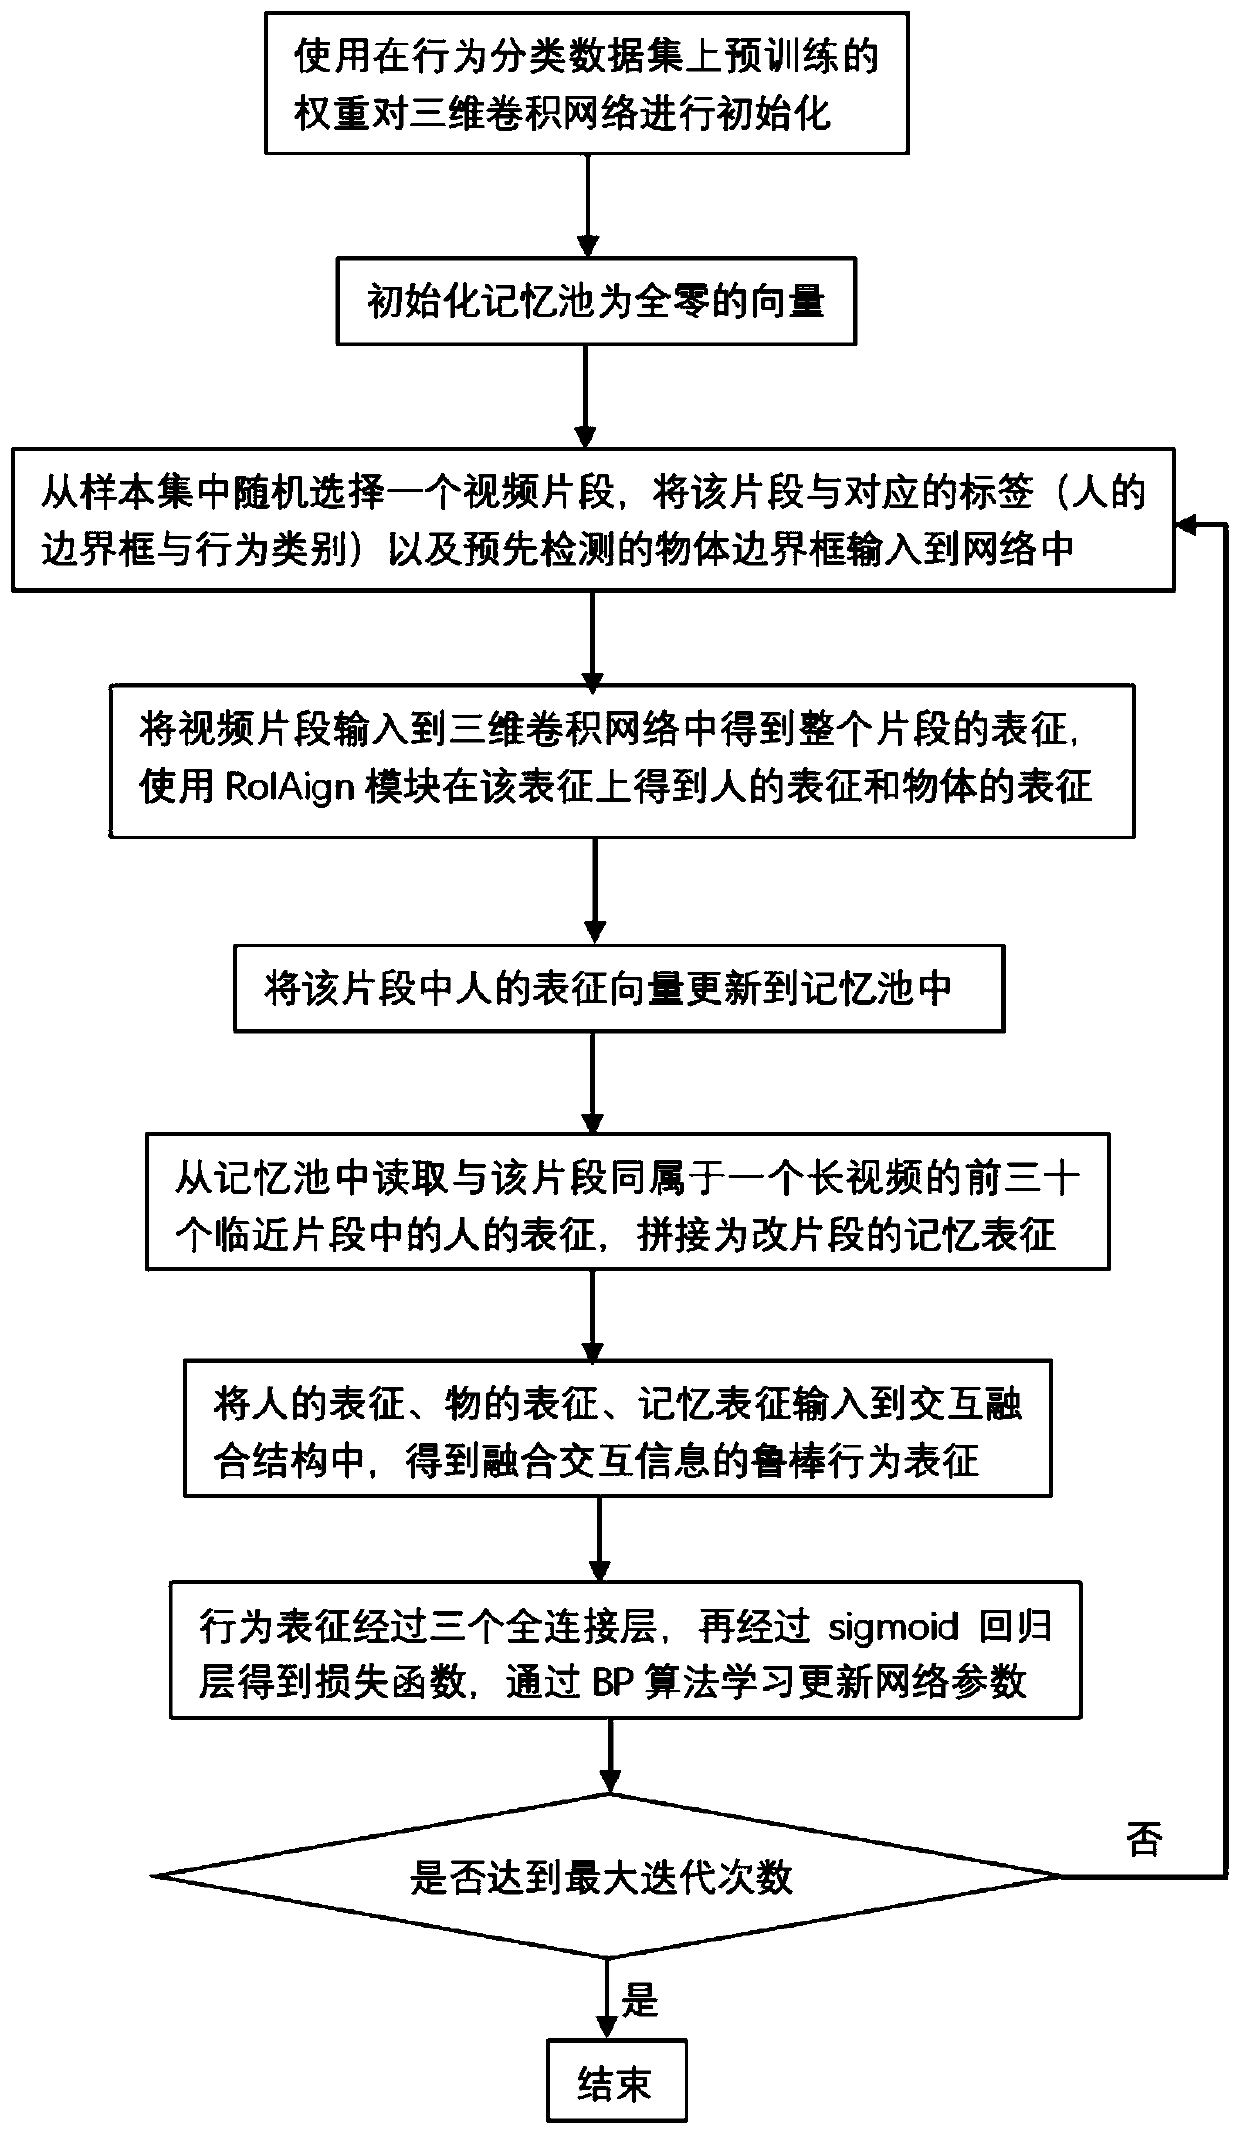 Multi-person behavior detection method and system based on deep learning and fusing various kinds of interaction information